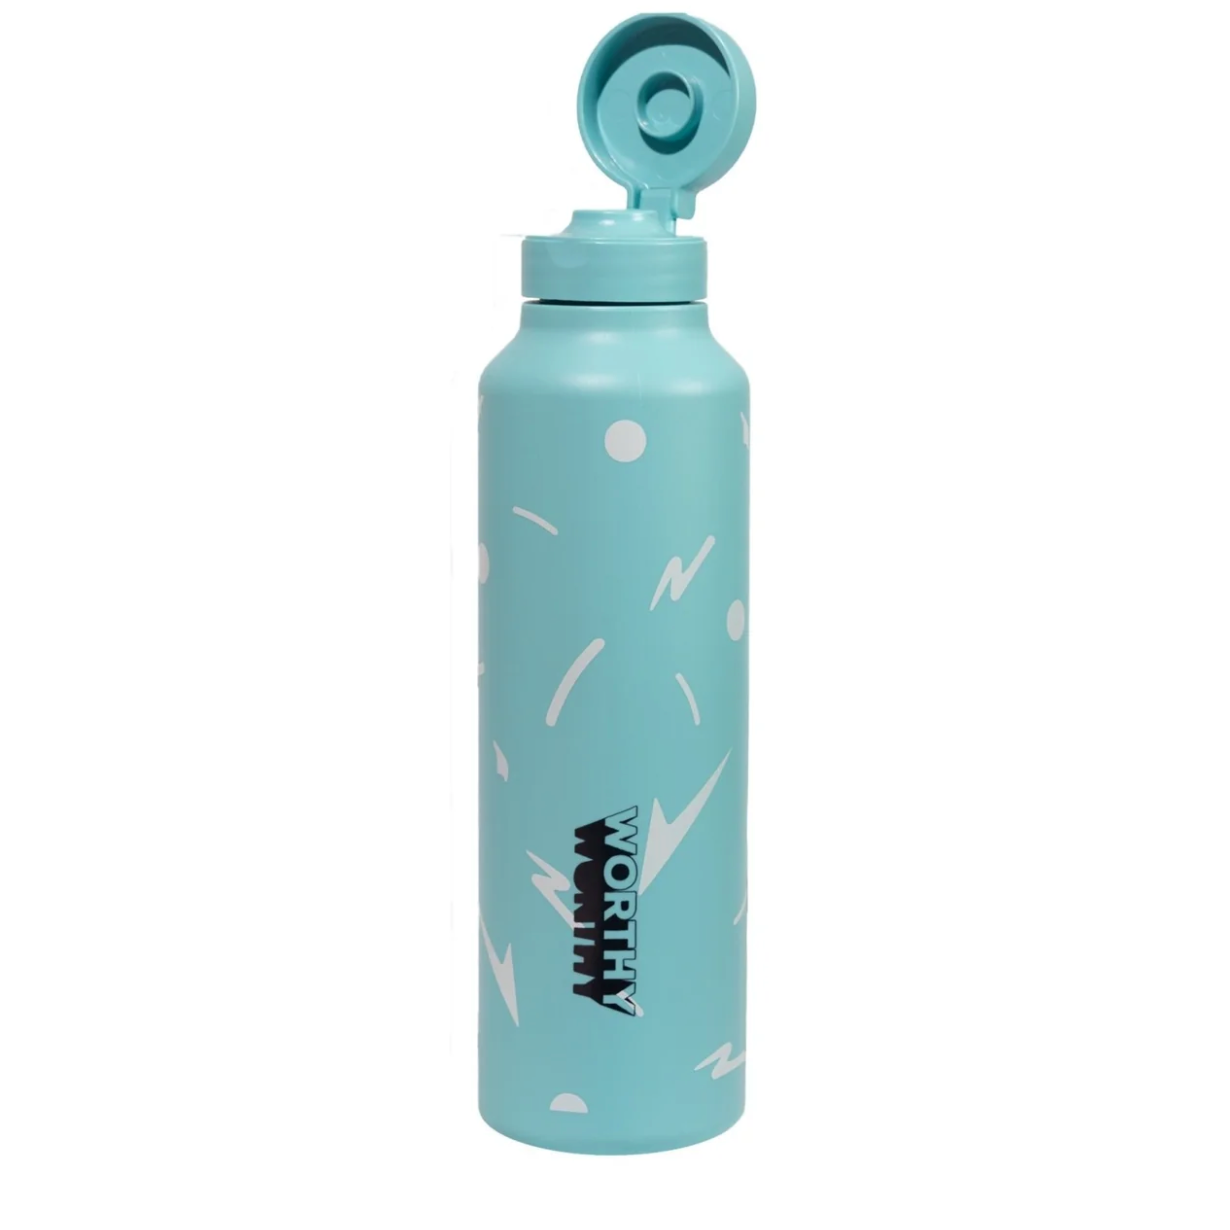 Worthy Sugarcane Drink Bottle 750ml, Please Choose Your Favourite Style